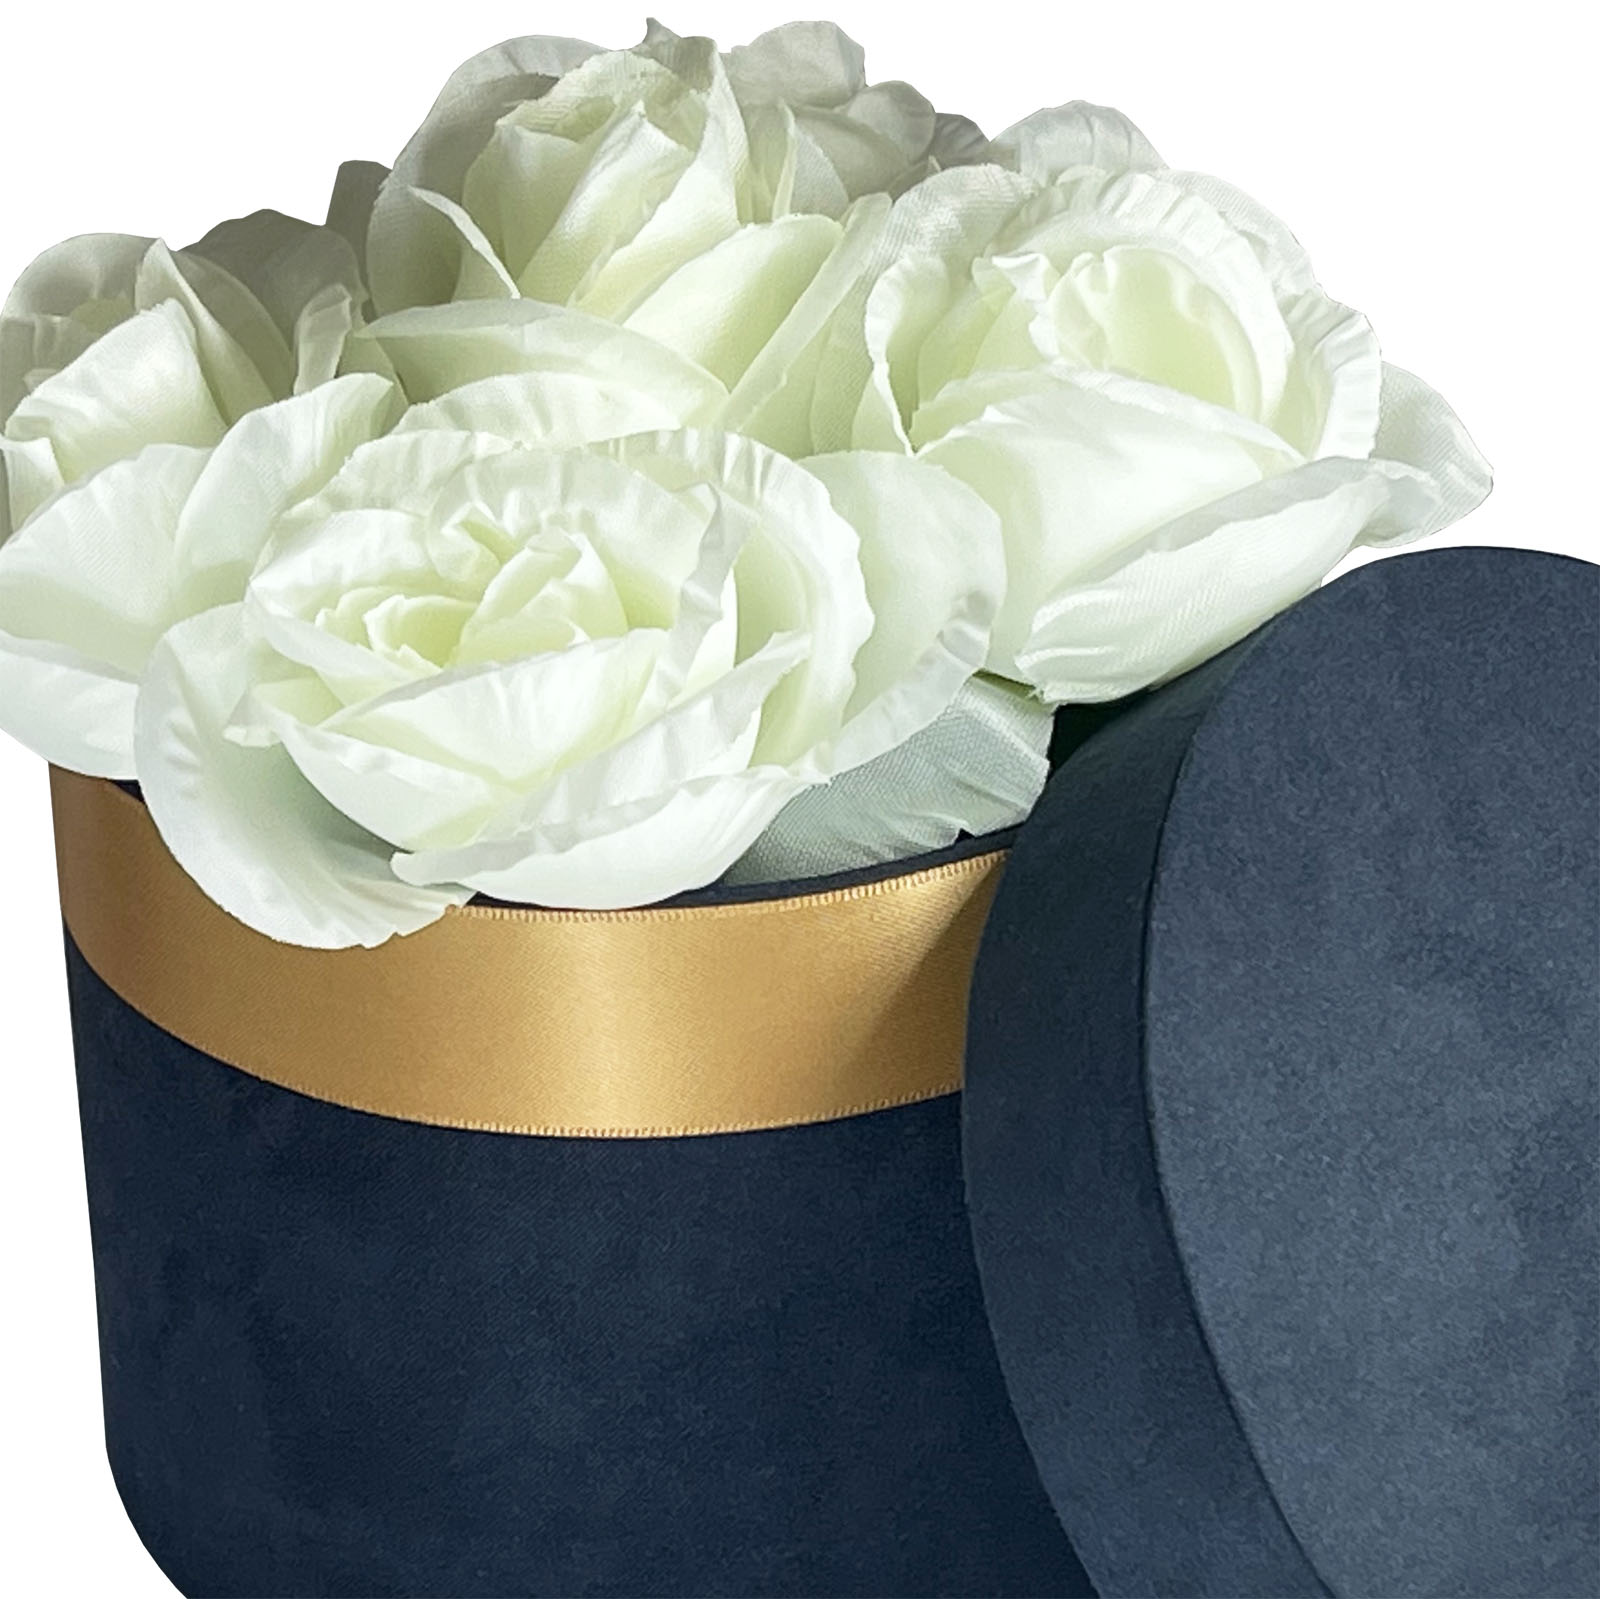 round suede flower box in navy blue with golden ribbon decoration and white fabric flowers